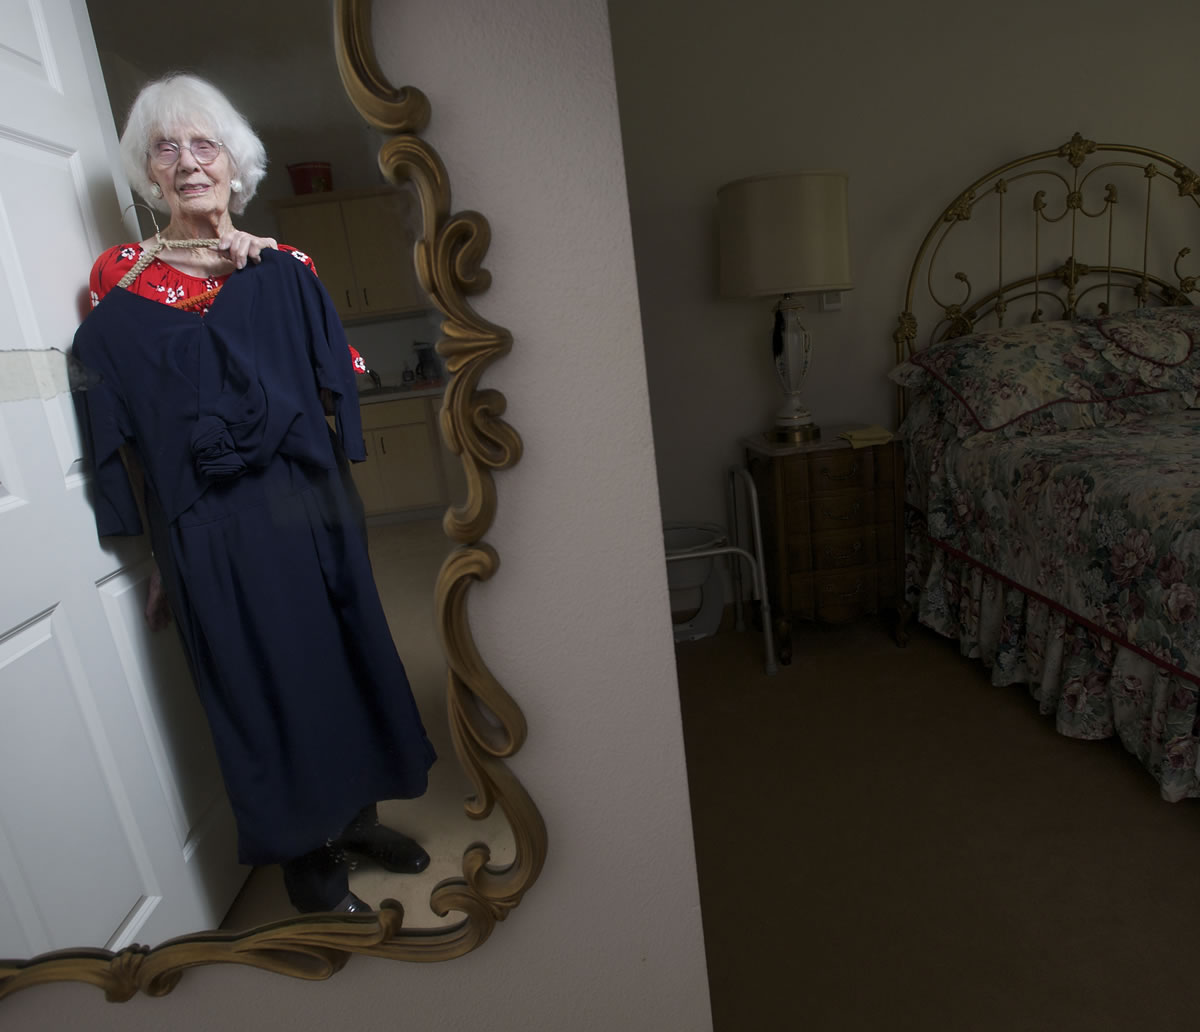 Maude Ryan, 98, holds the navy blue dress that she wore on her 25th wedding anniversary in 1961 at her Orchards home.